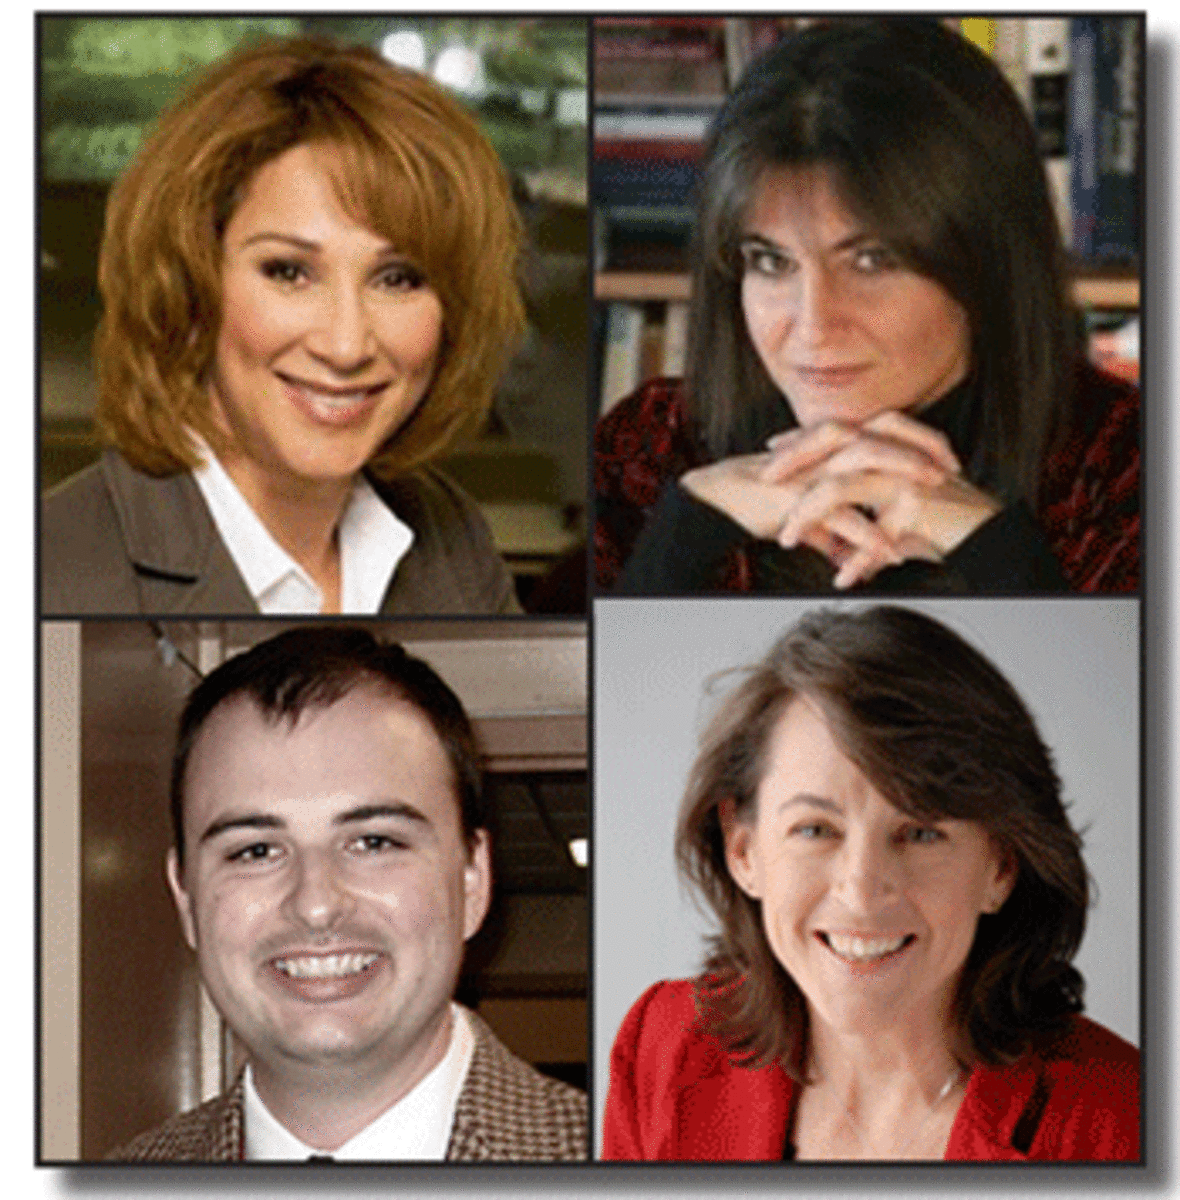 Clockwise from upper left: Val Zavala, Maria Armoudian, Sharon McNary, and Jesse Thorn